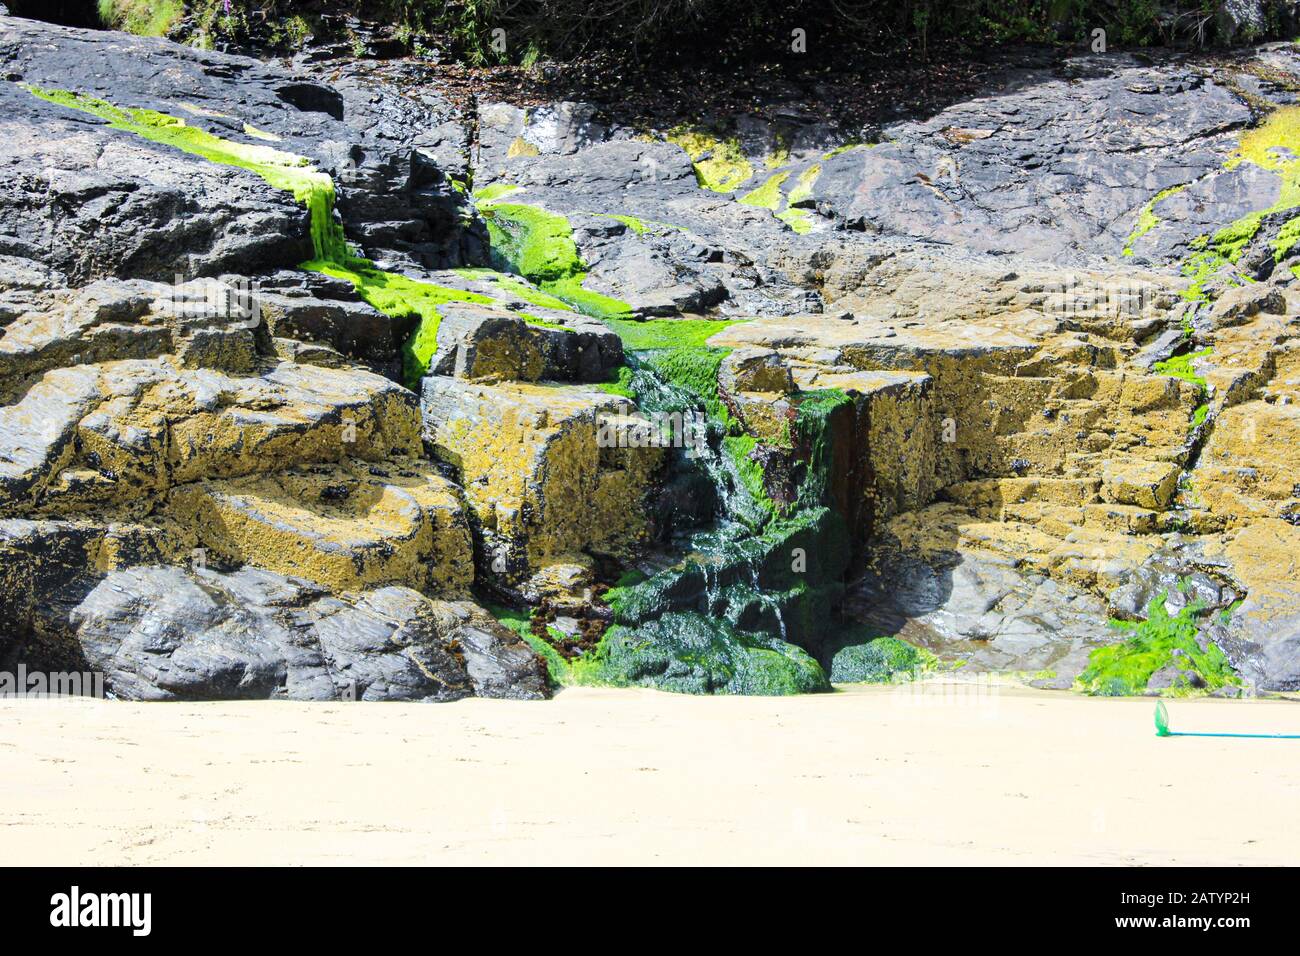 A natural rock waterfall covered in bright green seaweed. Taken in summer, Carbis Bay, Cornwall, England Stock Photo